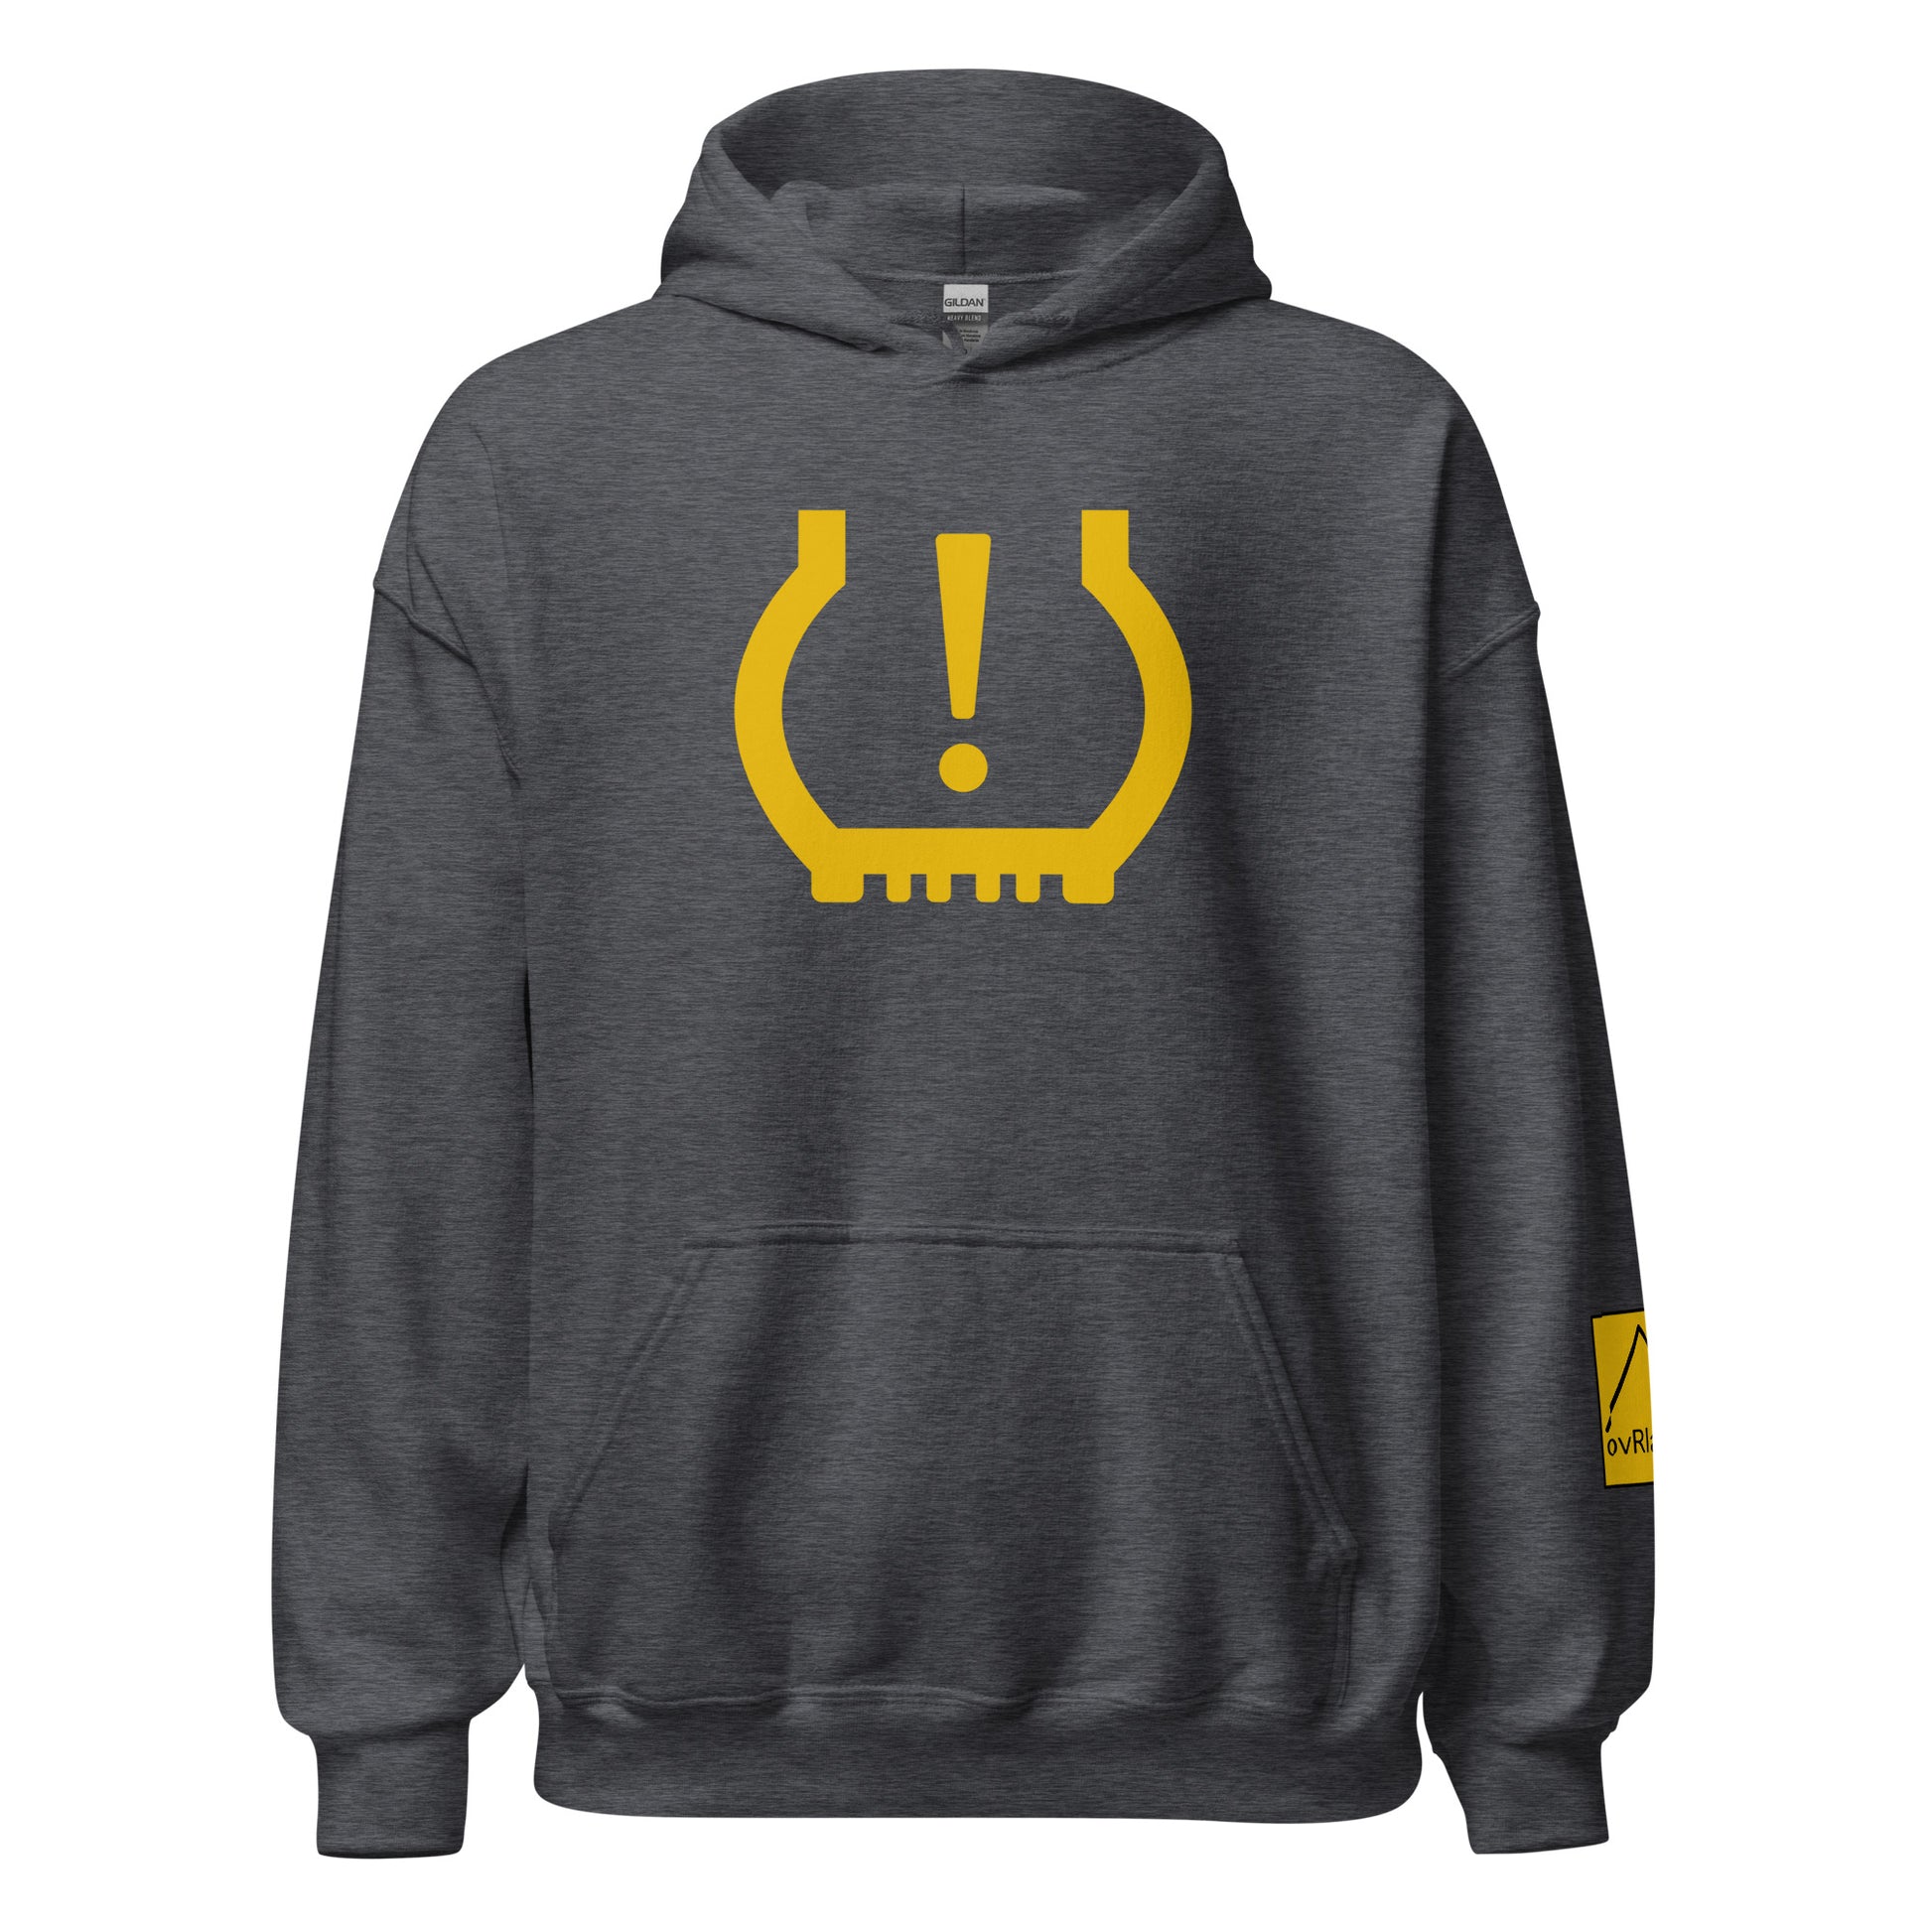 Air Down your tires dark grey Overland hoodie. overland365.com